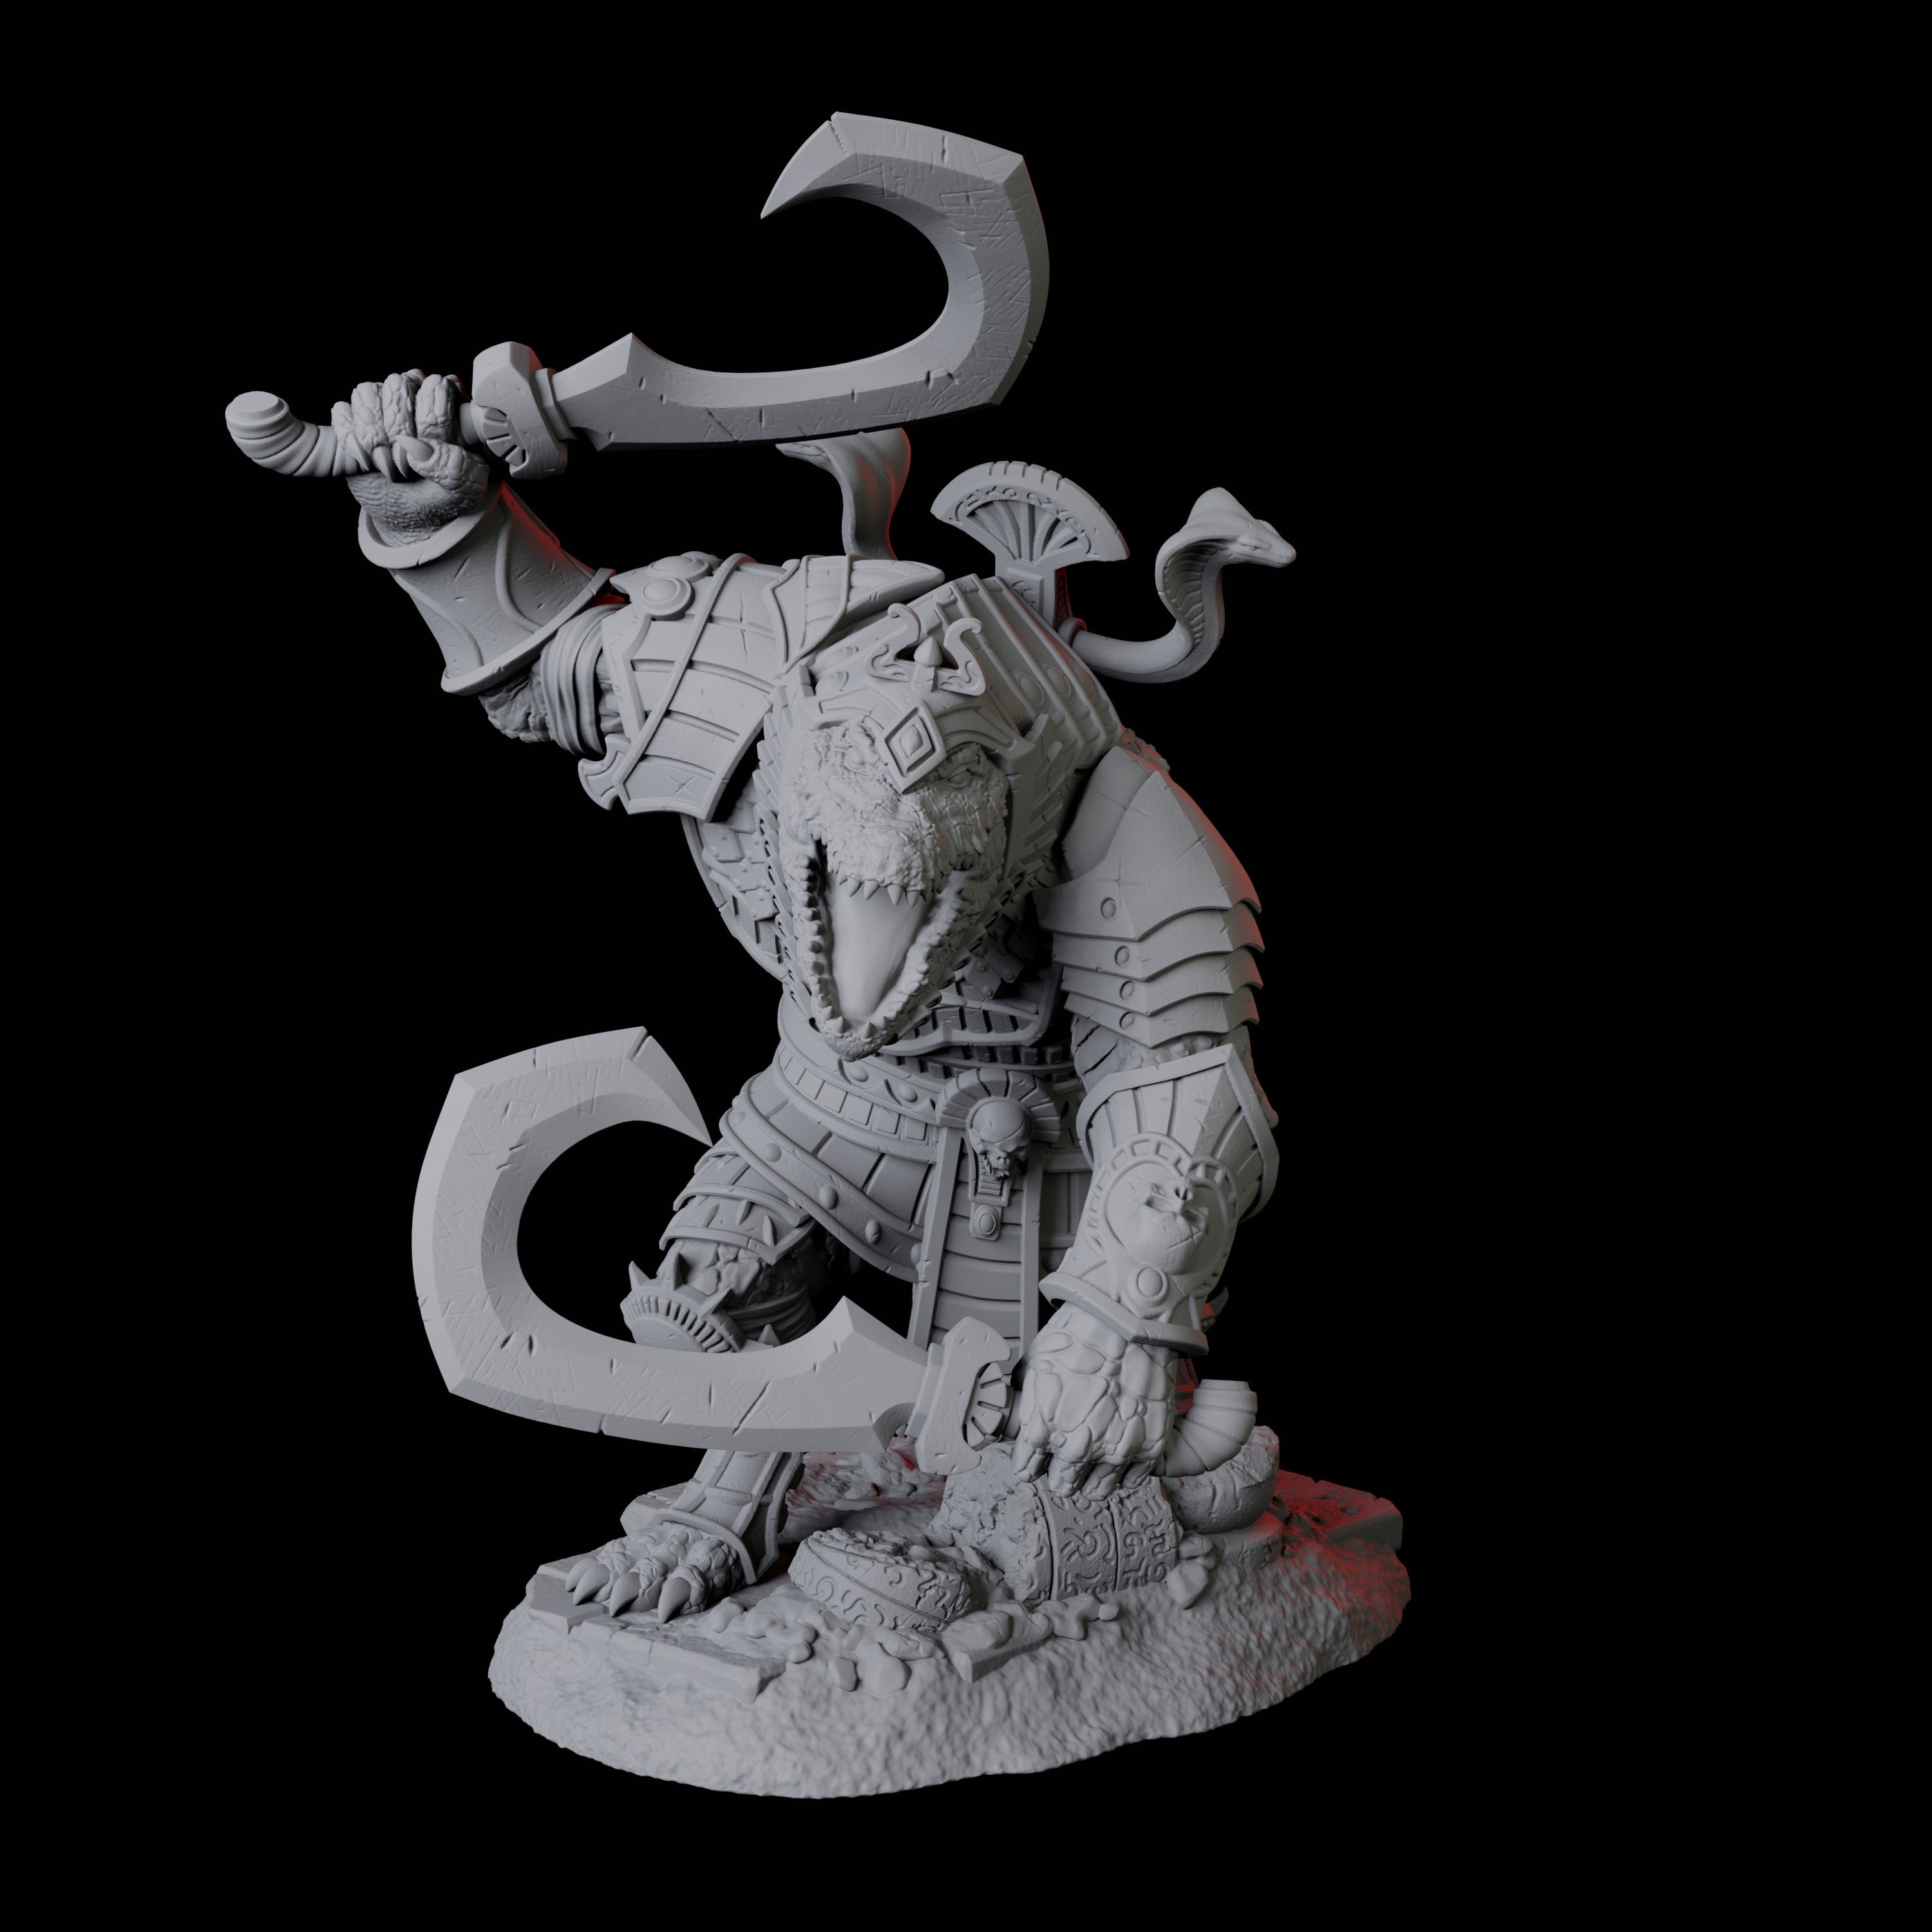 Charging Crocodile Lizardfolk Soldier A Miniature for Dungeons and Dragons, Pathfinder or other TTRPGs